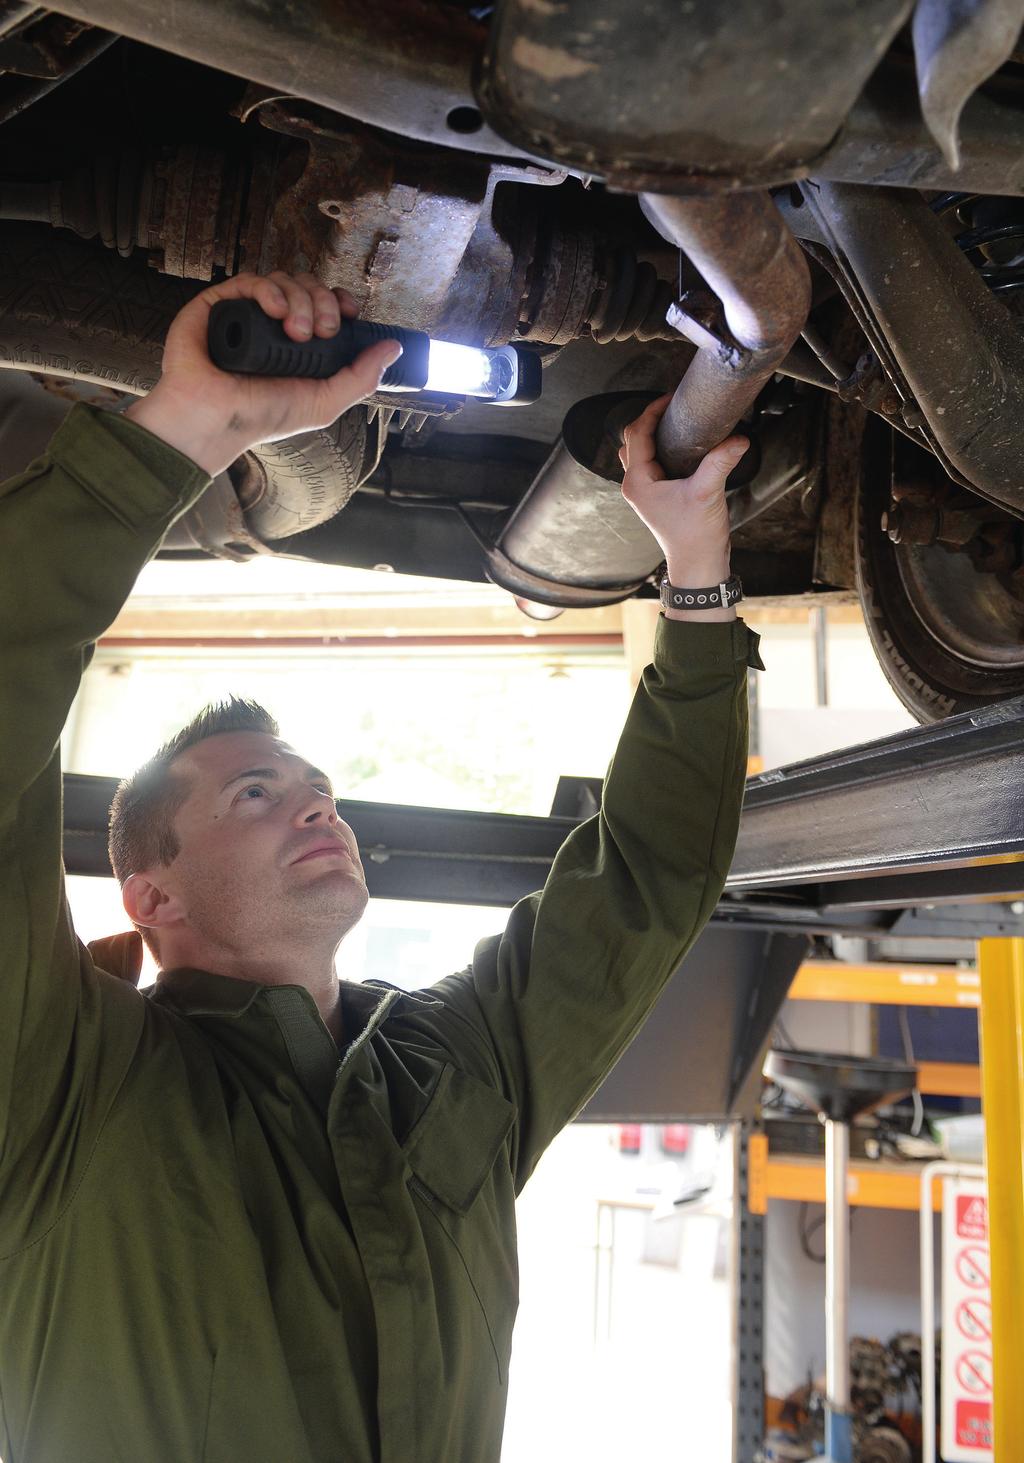 Courses FULL-TIME Level 3 Diploma in Light Vehicle Maintenance and Repair Principles Level 2 Diploma in Light Vehicle Maintenance and Repair Principles Level 2 Diploma in Vehicle Fitting Principles